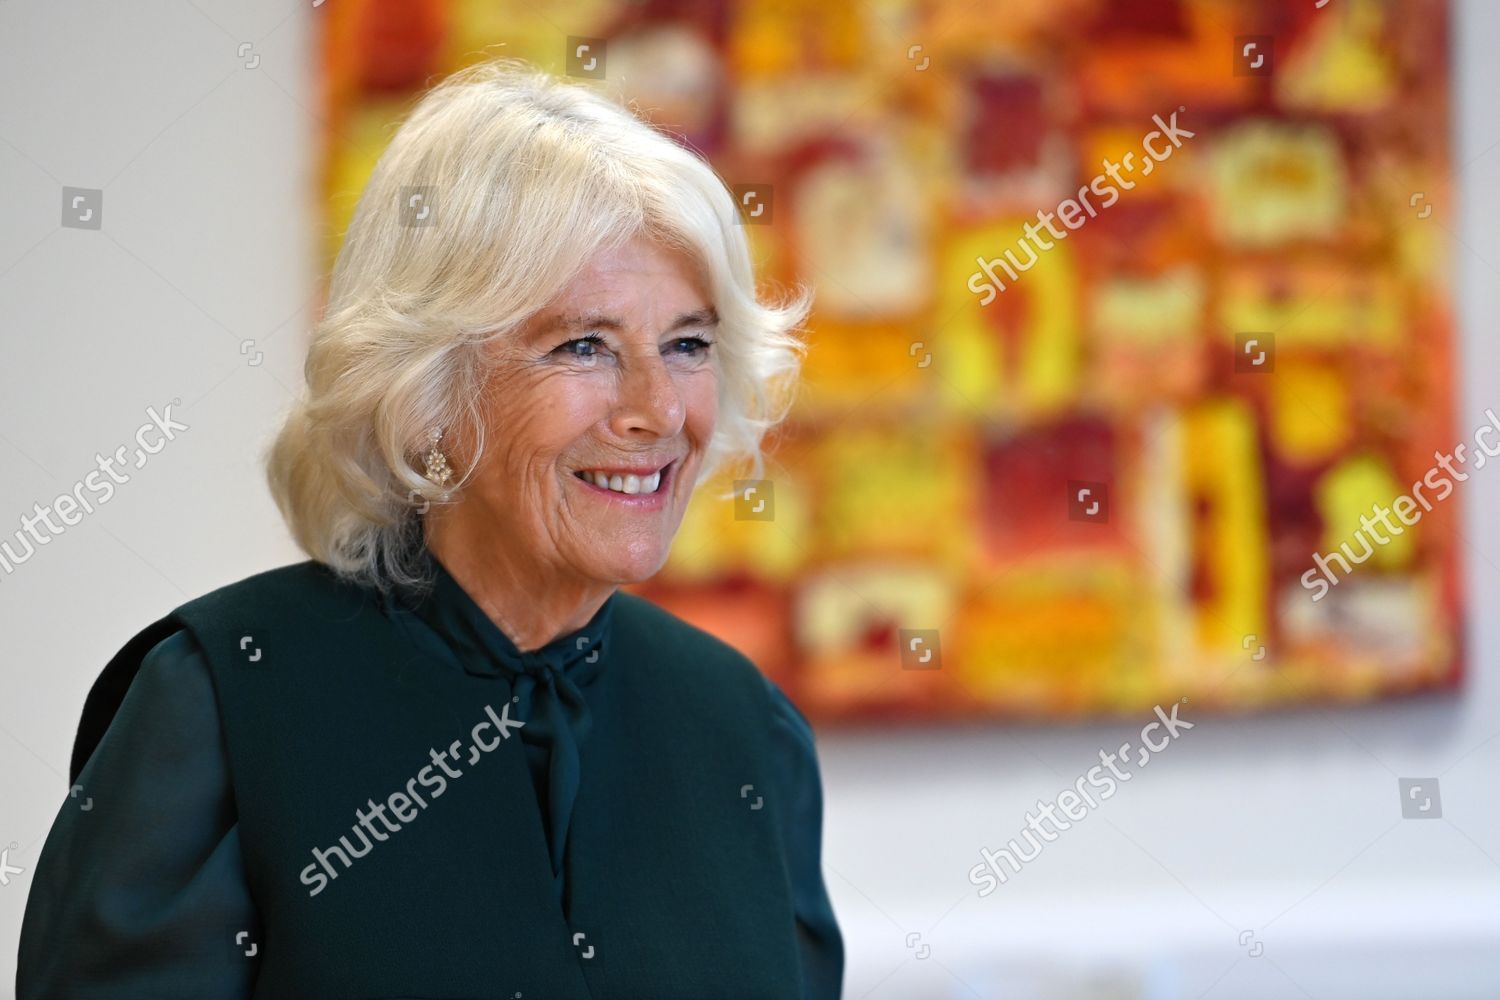 the-duchess-of-rothesay-visit-to-nairn-book-and-arts-festival-and-environment-charity-green-hive-nairn-community-centre-scotland-uk-shutterstock-editorial-12437607m.jpg